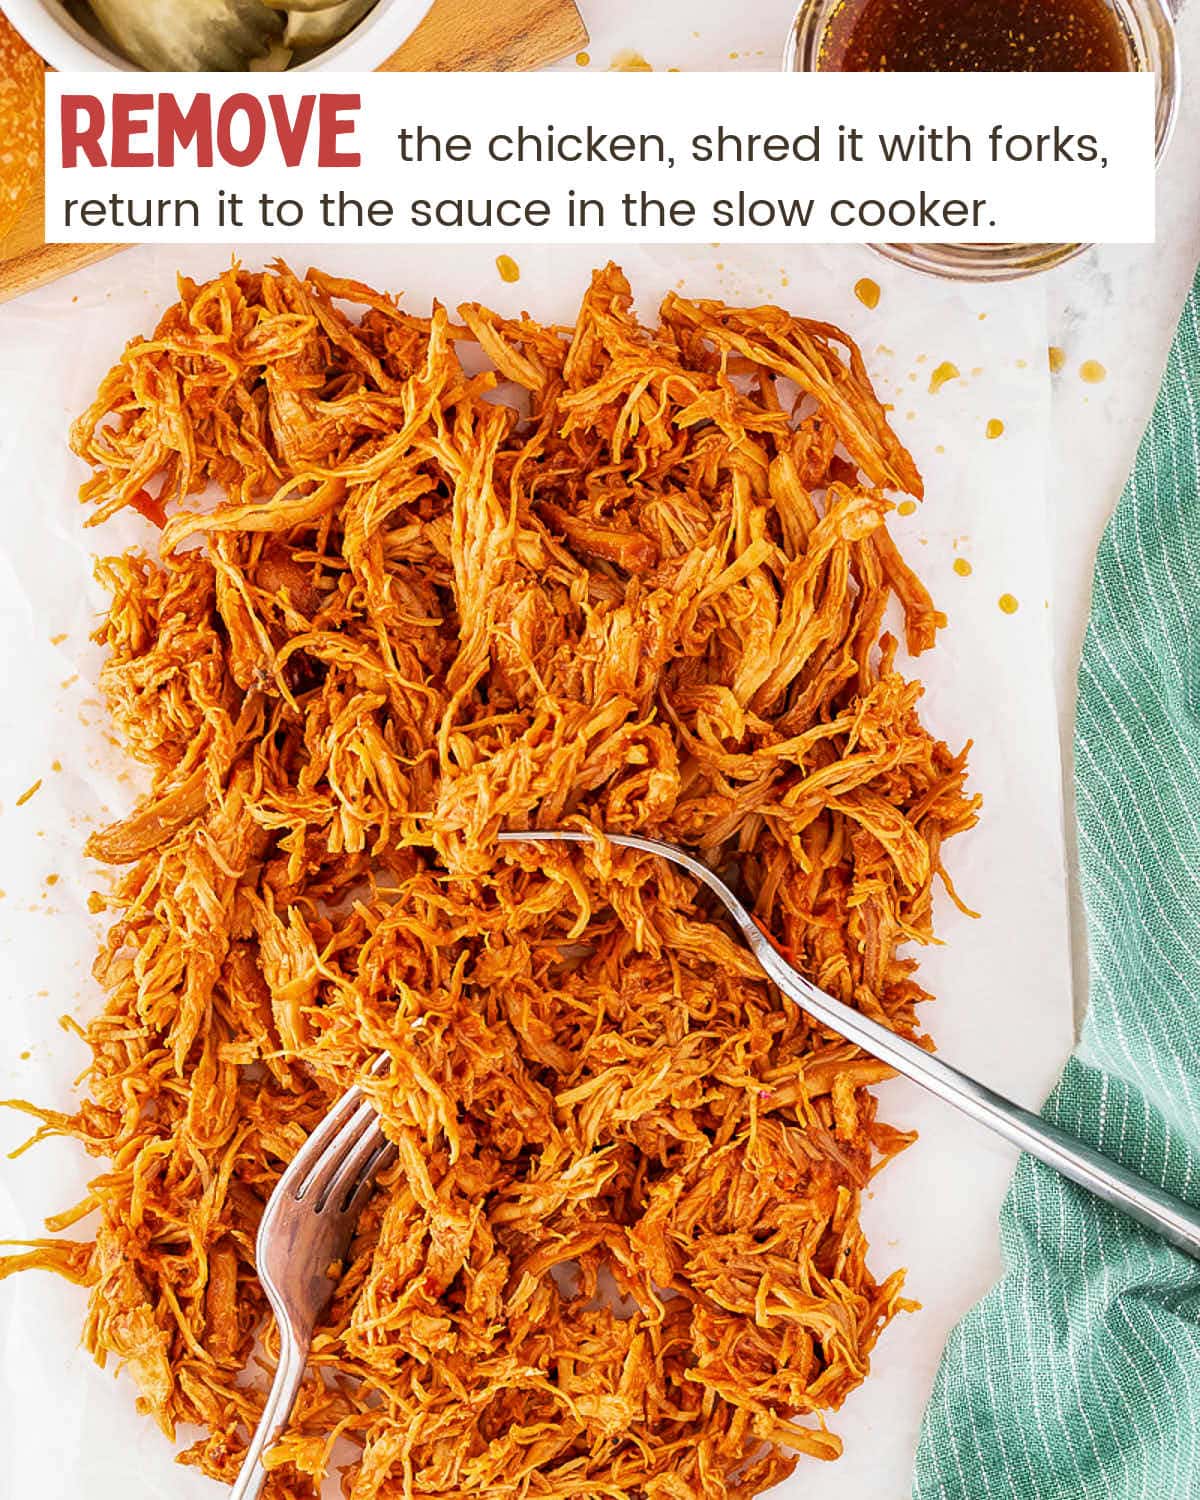 Slow Cooker Pulled Chicken on a plate with a fork.